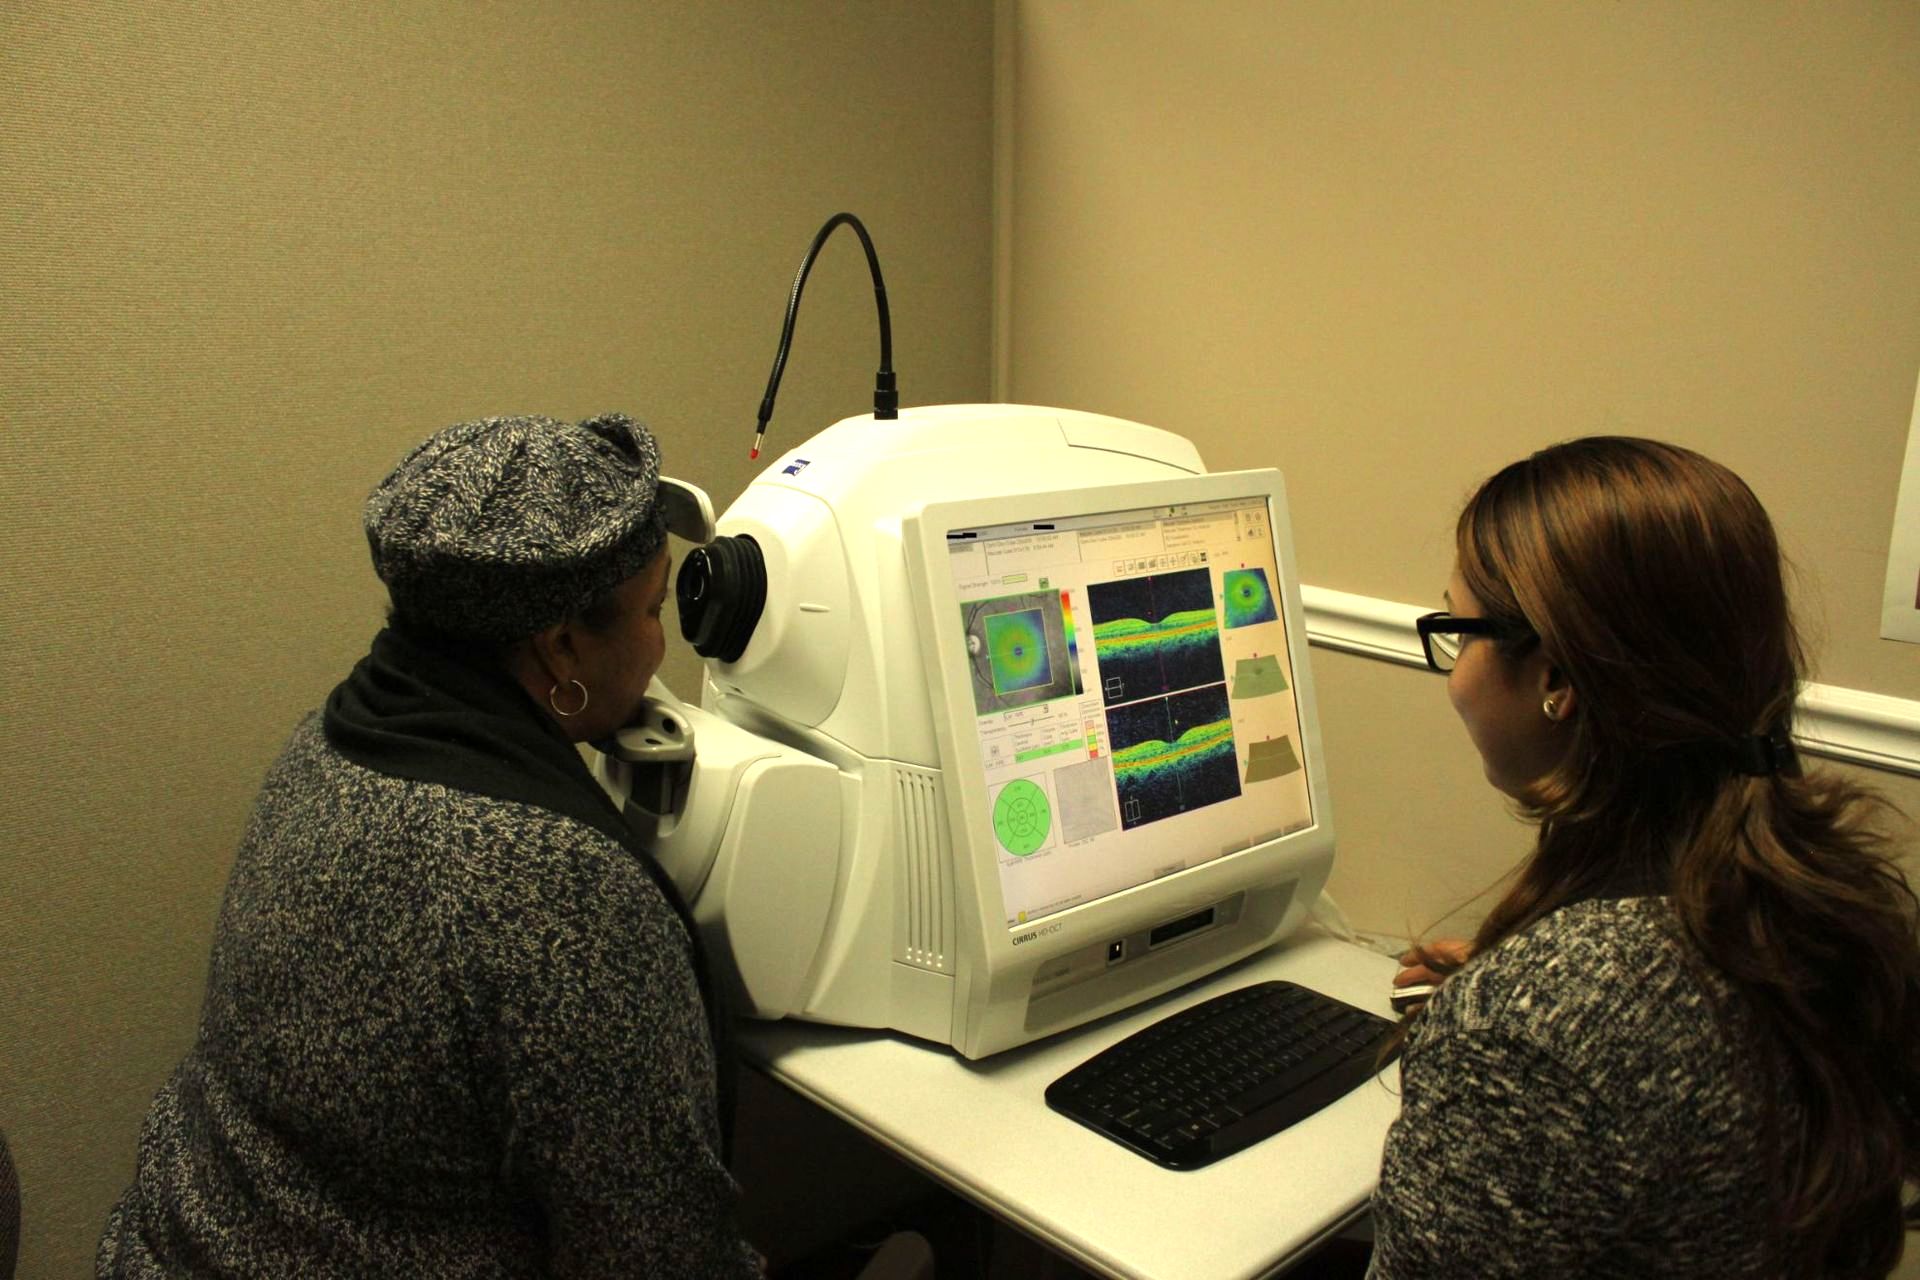 Eye Care and Surgery provider performs OCT aqcuisition on female patient to examine retina